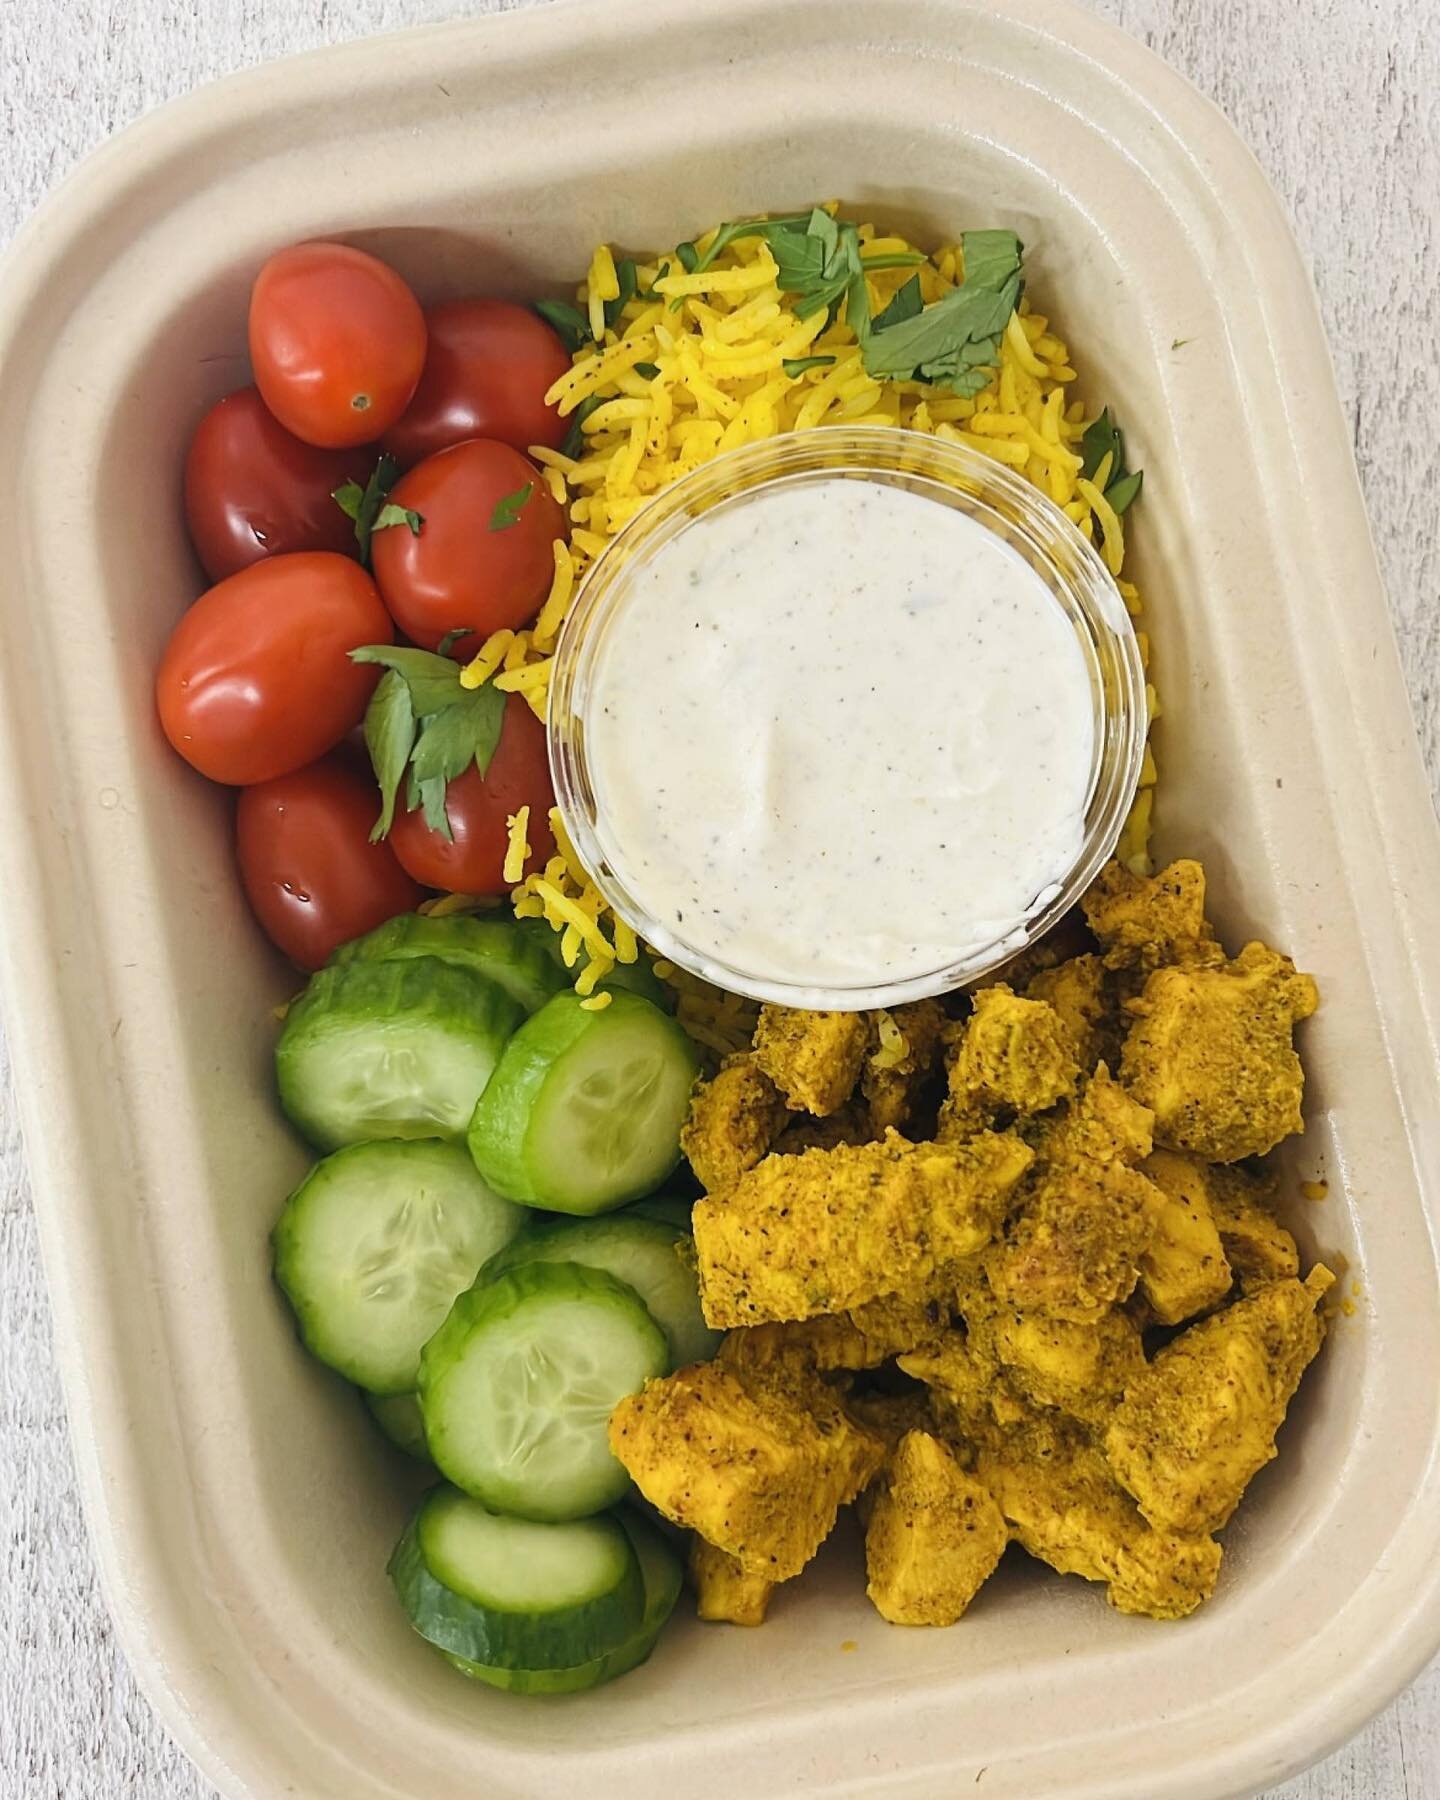 Meal prep tip:

Marinade your chicken in kefir for a unique, delicious flavor and gut health benefits!

Our Shawarma is on the menu this week. Order by Thursdays 9PM!

PrepToTable.net